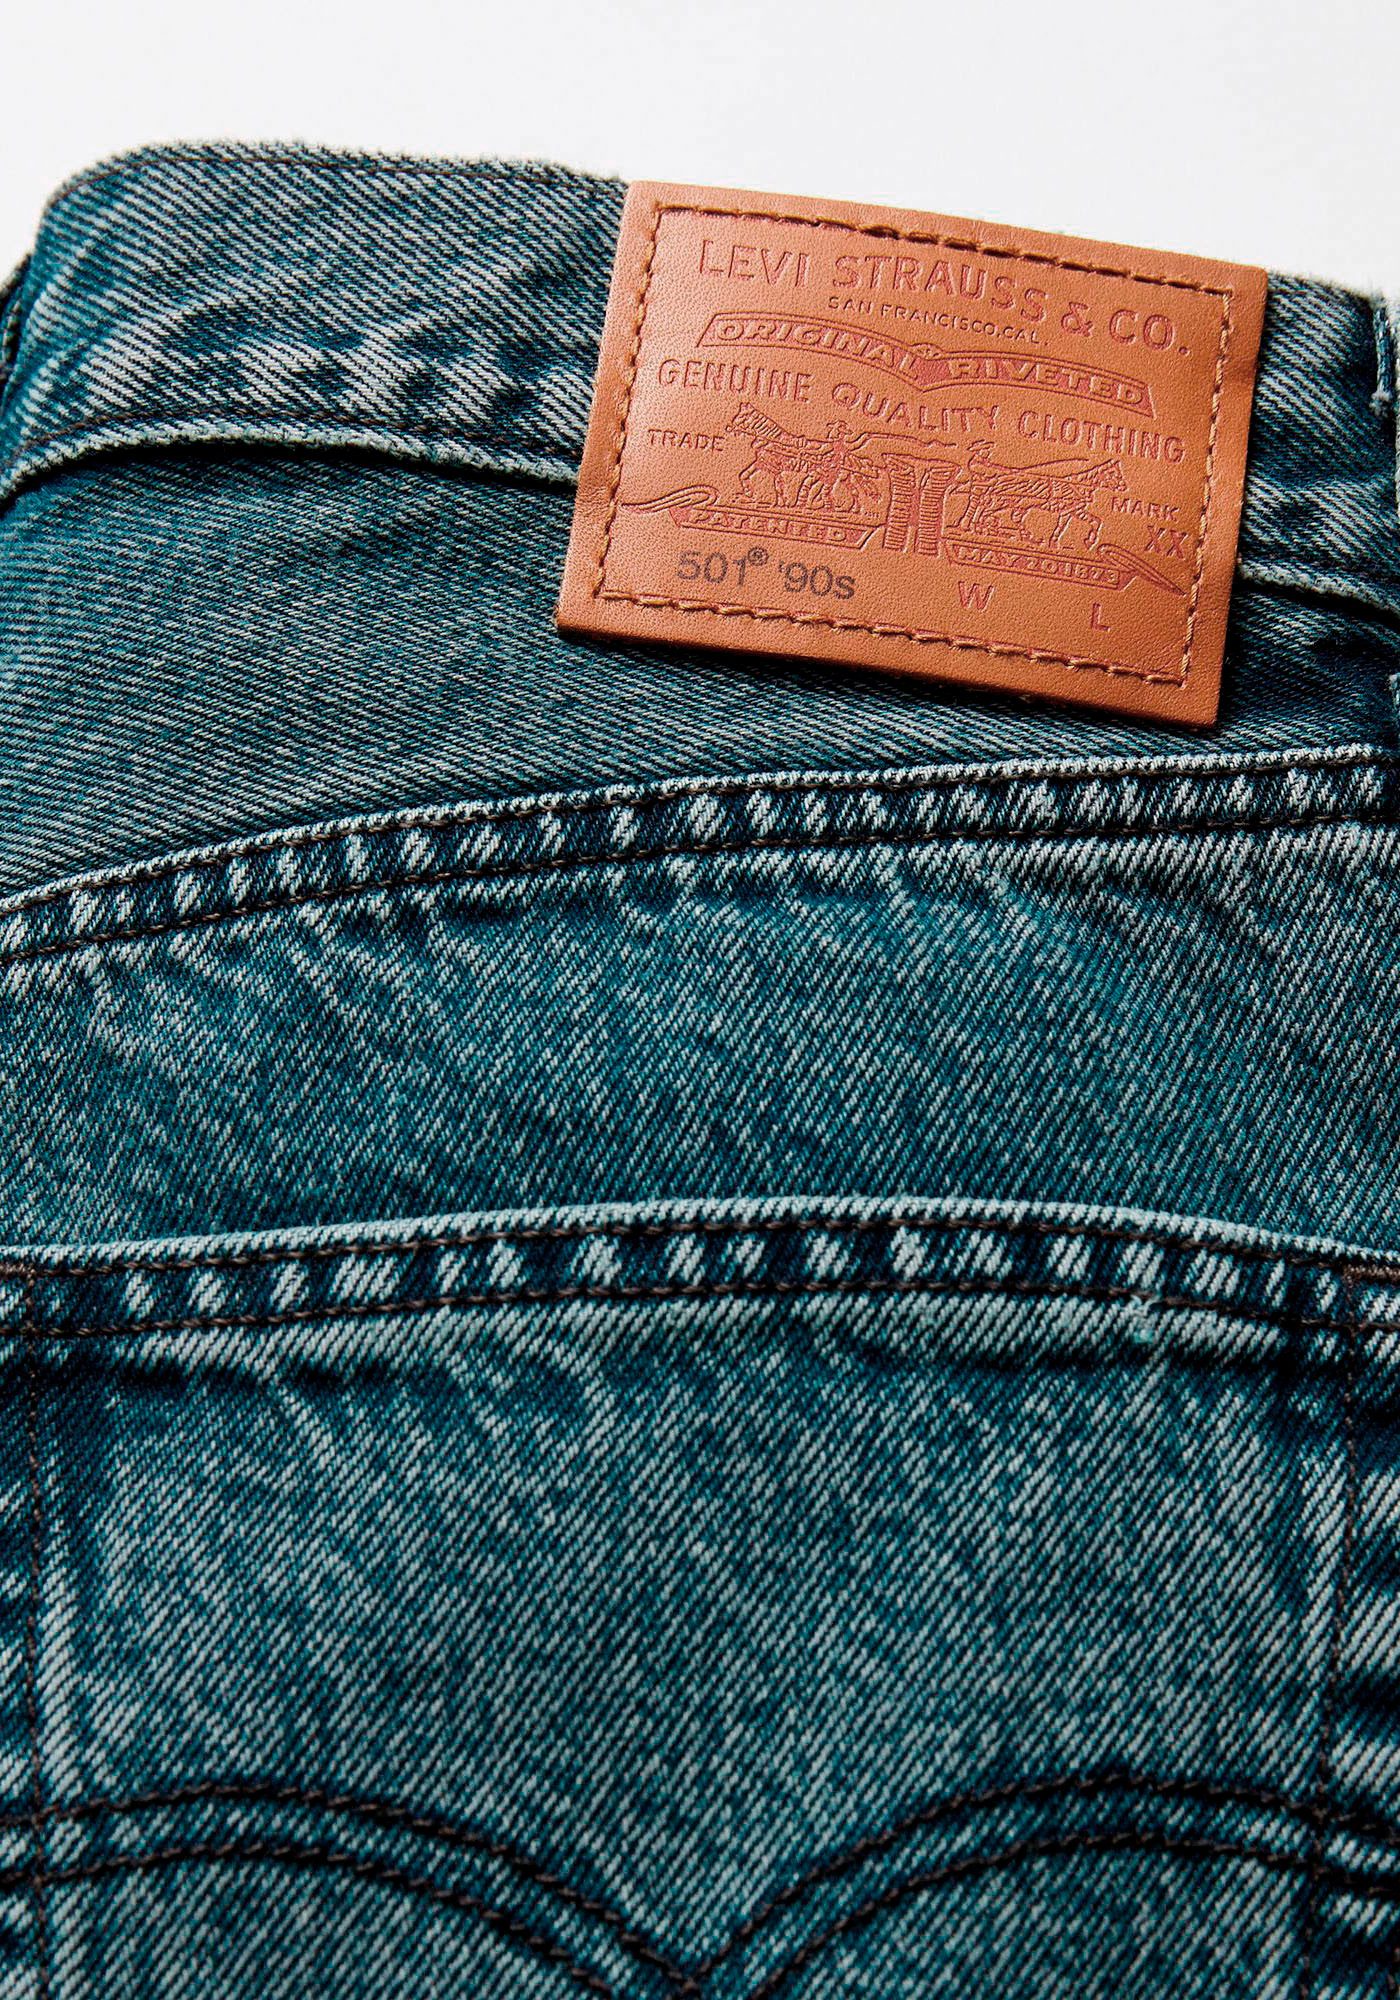 90'S Collection multi 501 501 Weite denim Jeans Levi's®